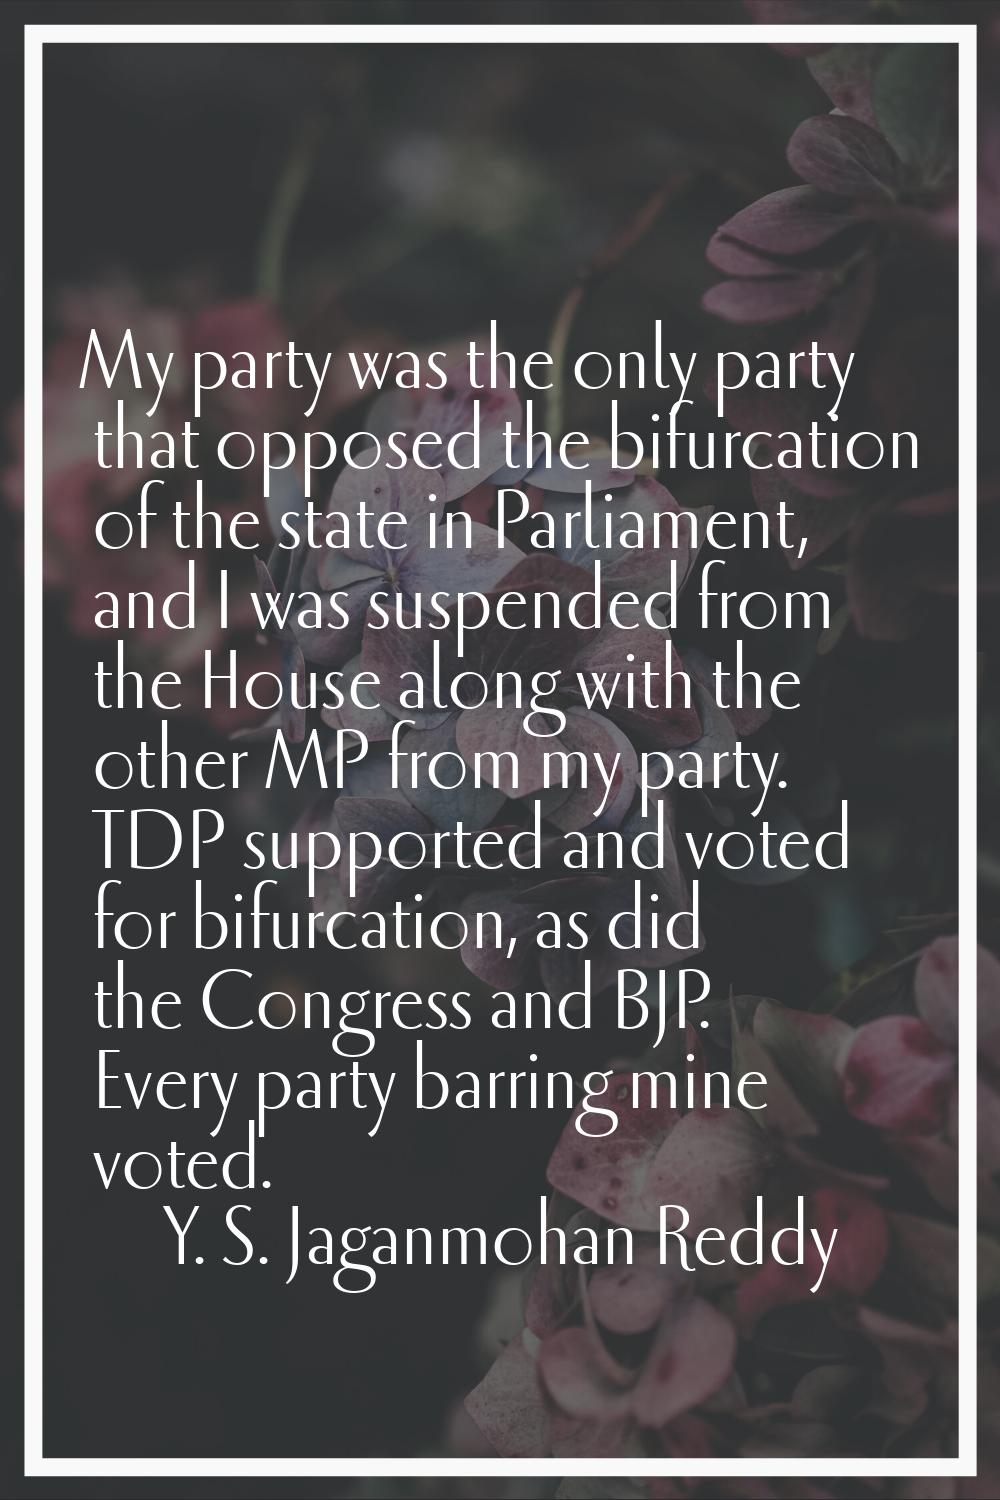 My party was the only party that opposed the bifurcation of the state in Parliament, and I was susp